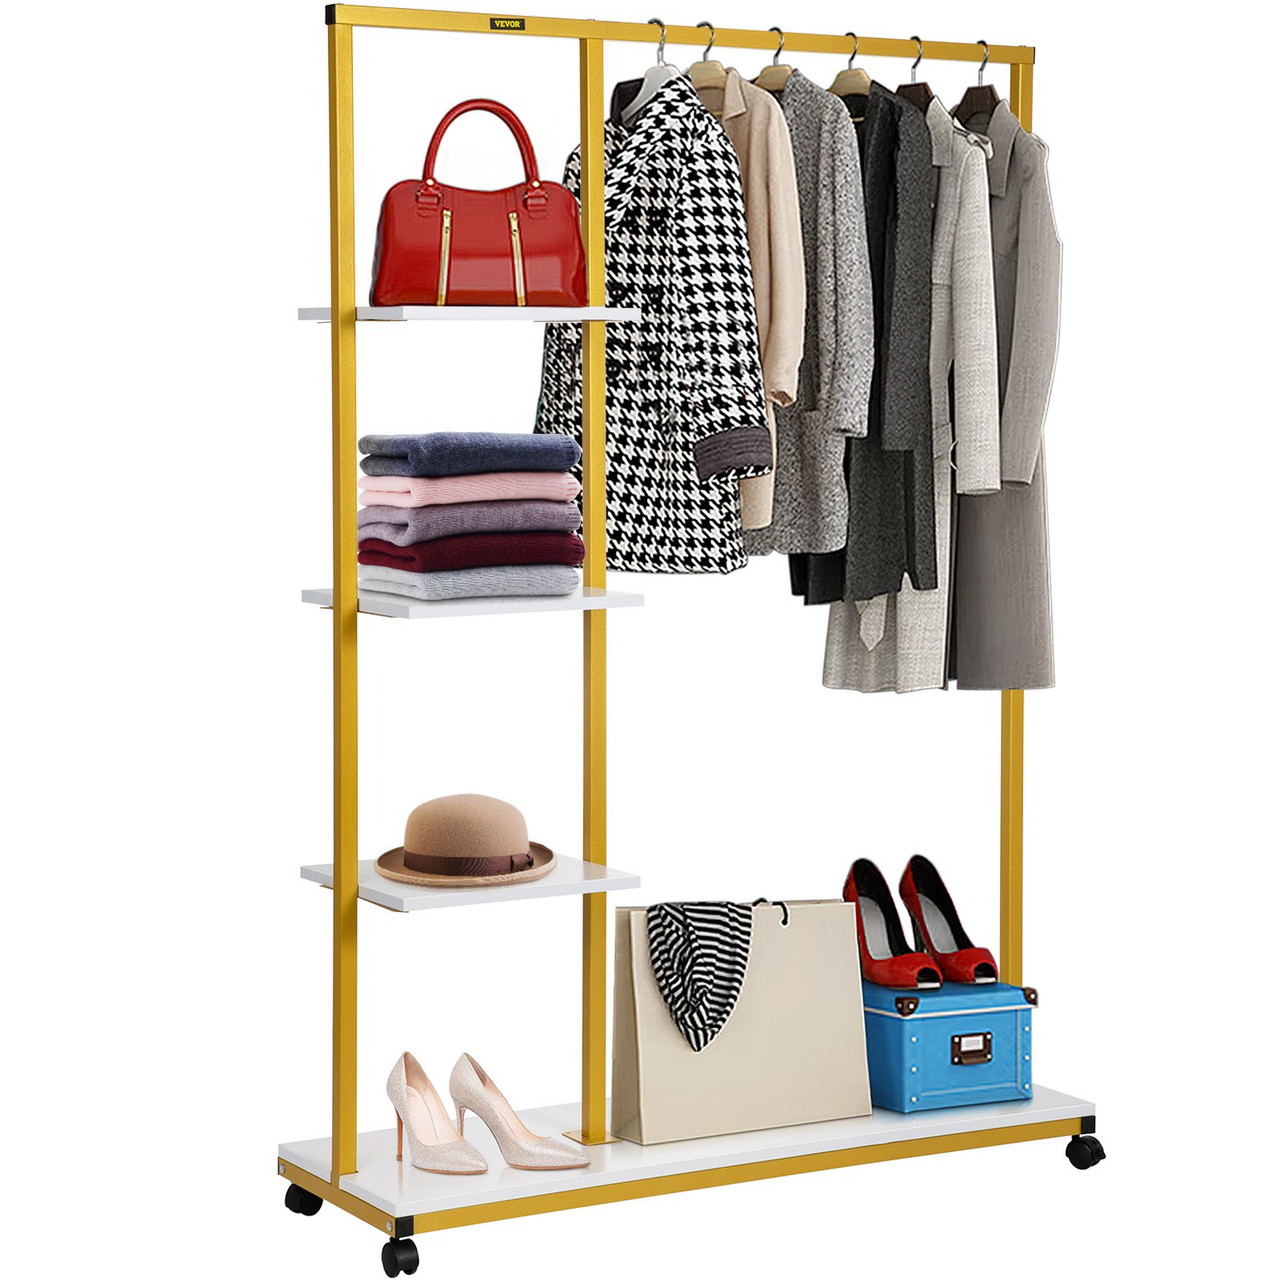 Clothing Garment Rack, 39.4"x14.2"x59.1", Heavy-duty Clothes Rack w/ Bottom Shelf & Extra 3 Side Shelves, 4 Swivel Casters, Rolling Clothes Organizer for Laundry Room Retail Store Boutique, Gold